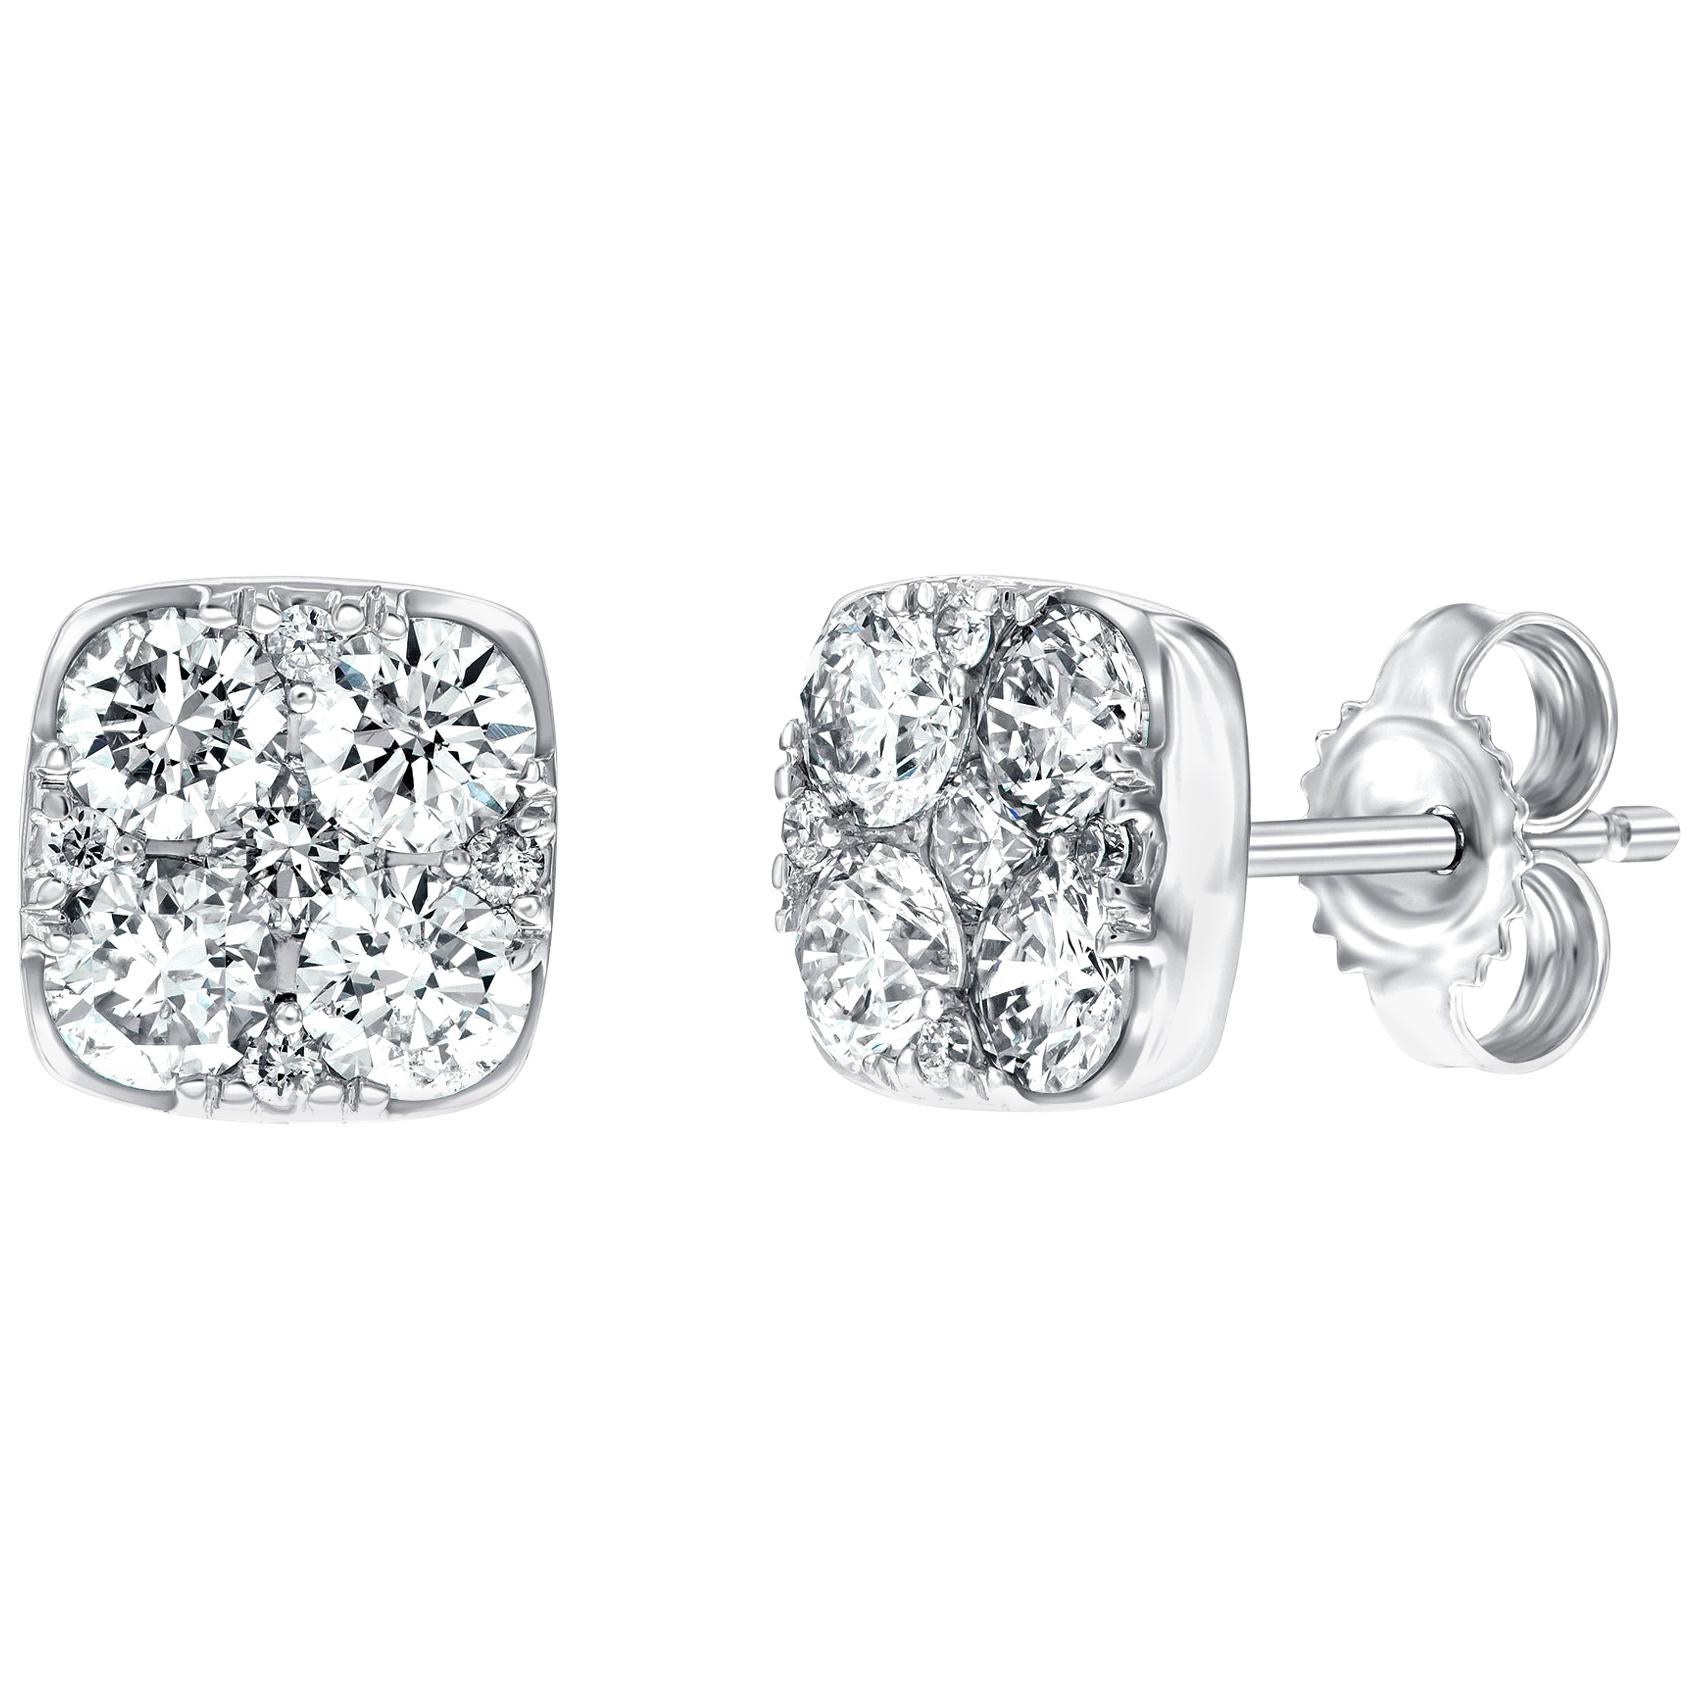 Diamond Square Cluster 18 Kt White Gold 1.00 Carat Pave Set Round Stud Earrings